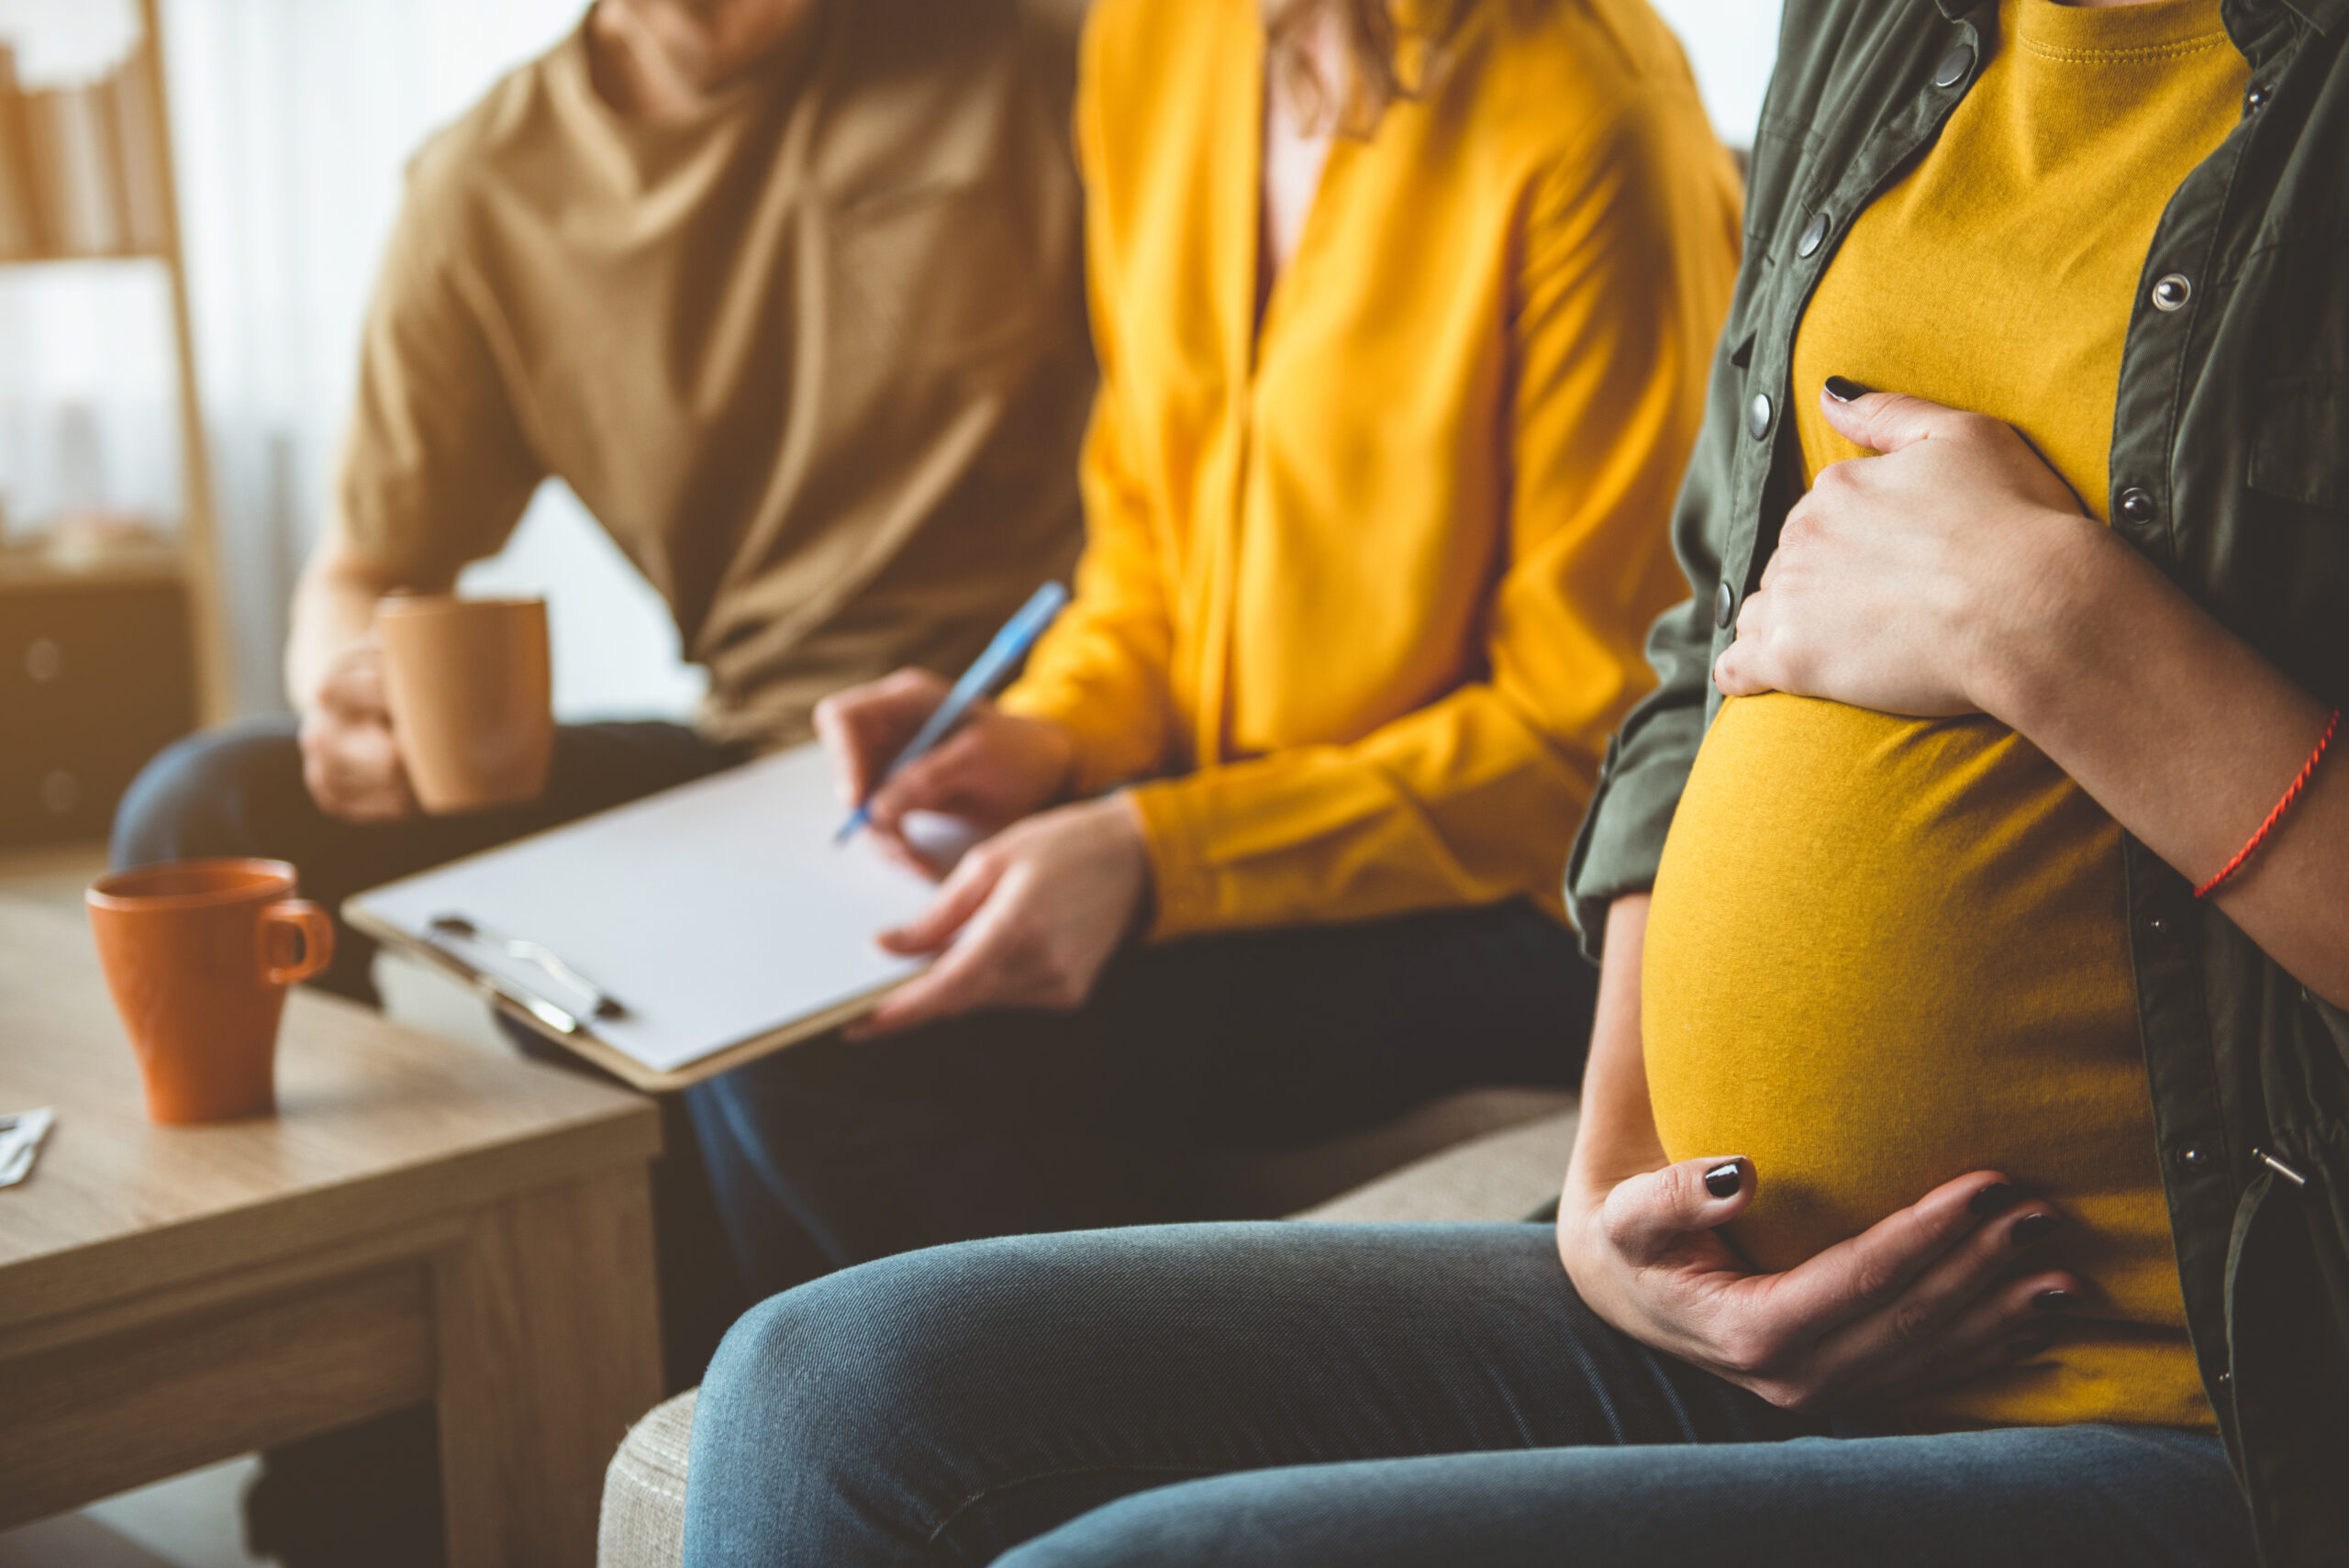 Surrogacy – what’s it all about?